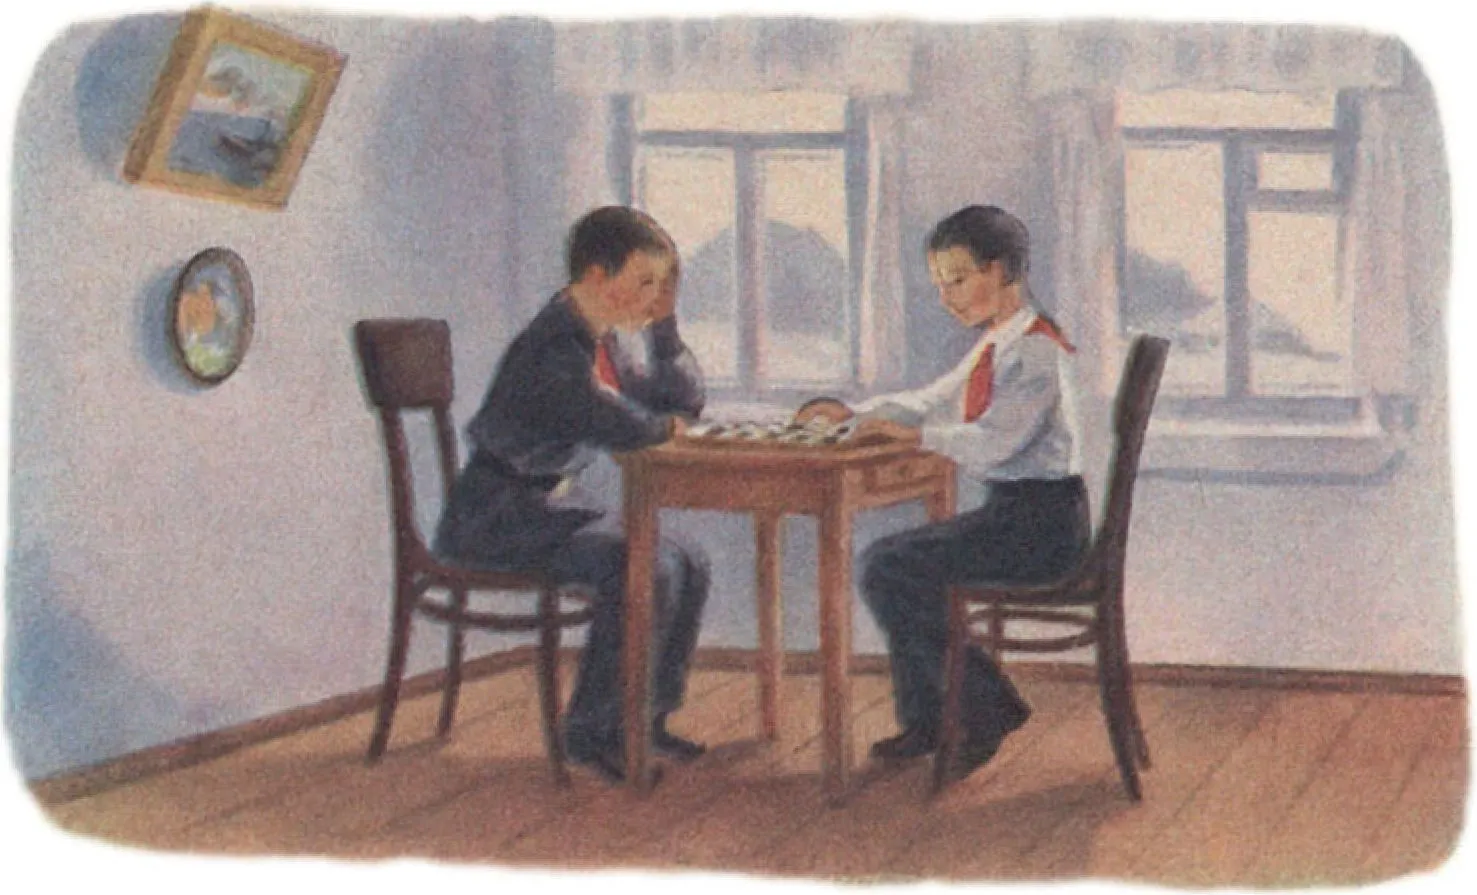 2 students playing